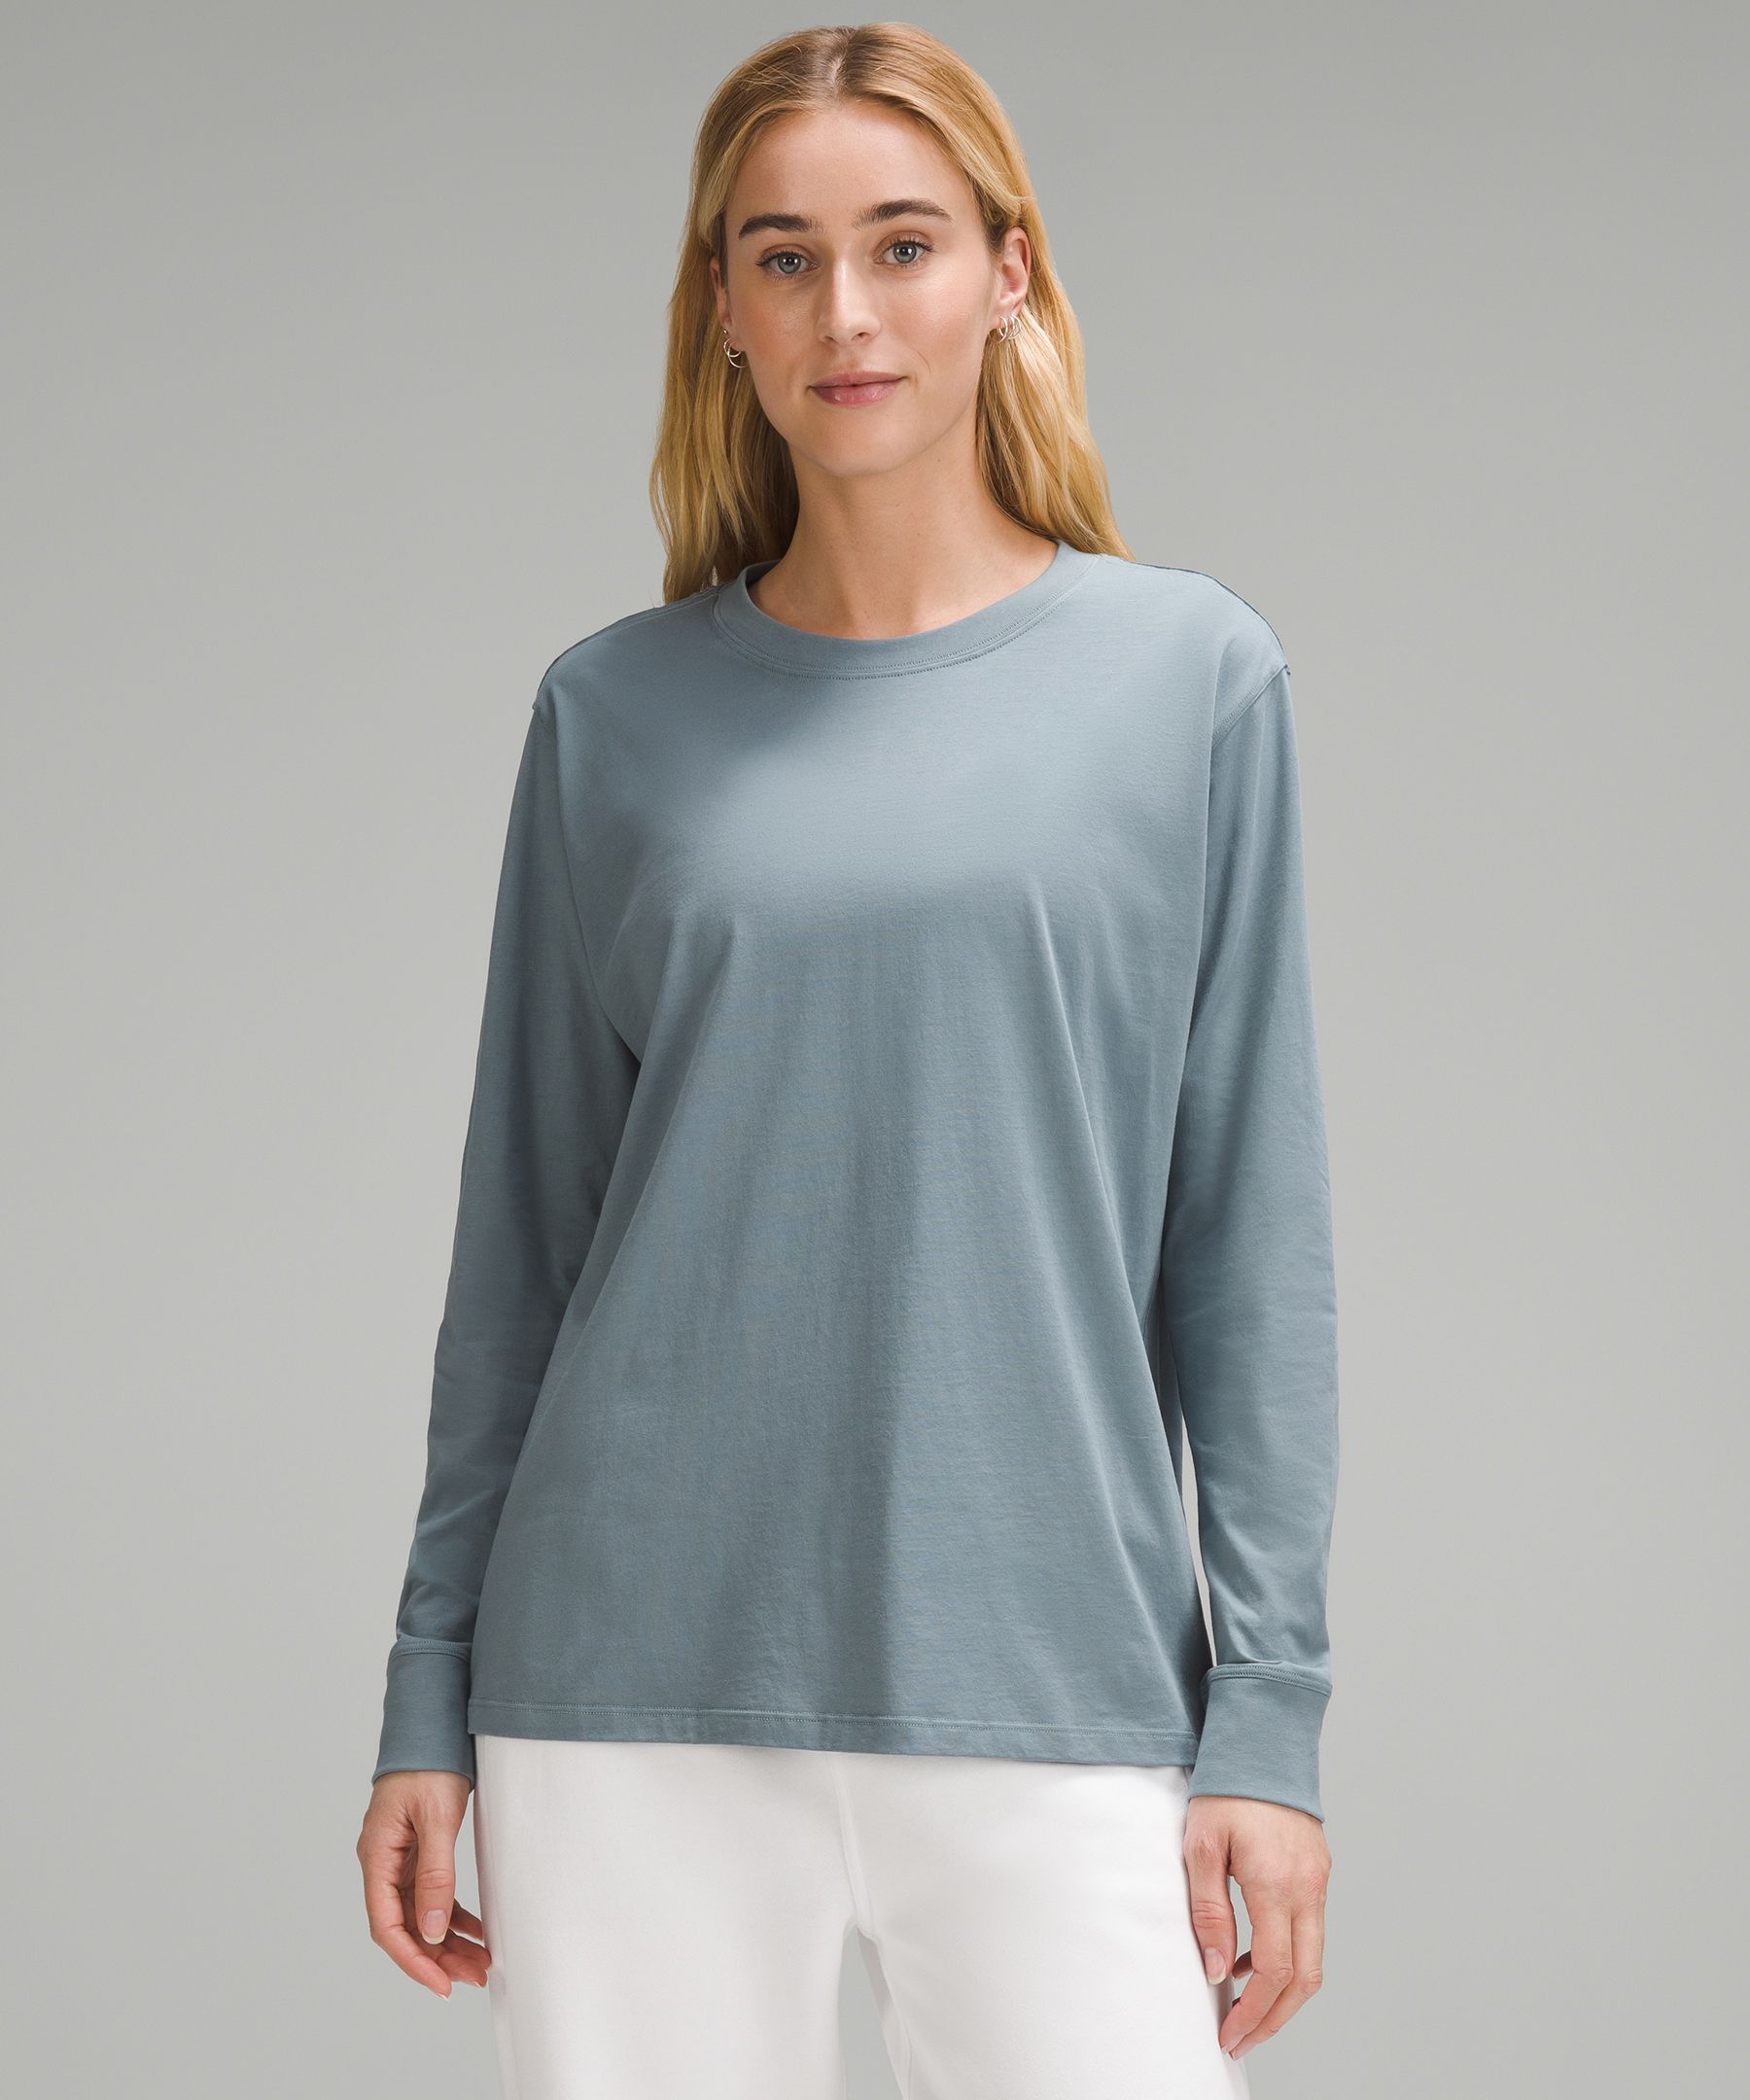 Lululemon shoppers are obsessed with this long-sleeve tee: 'Perfection